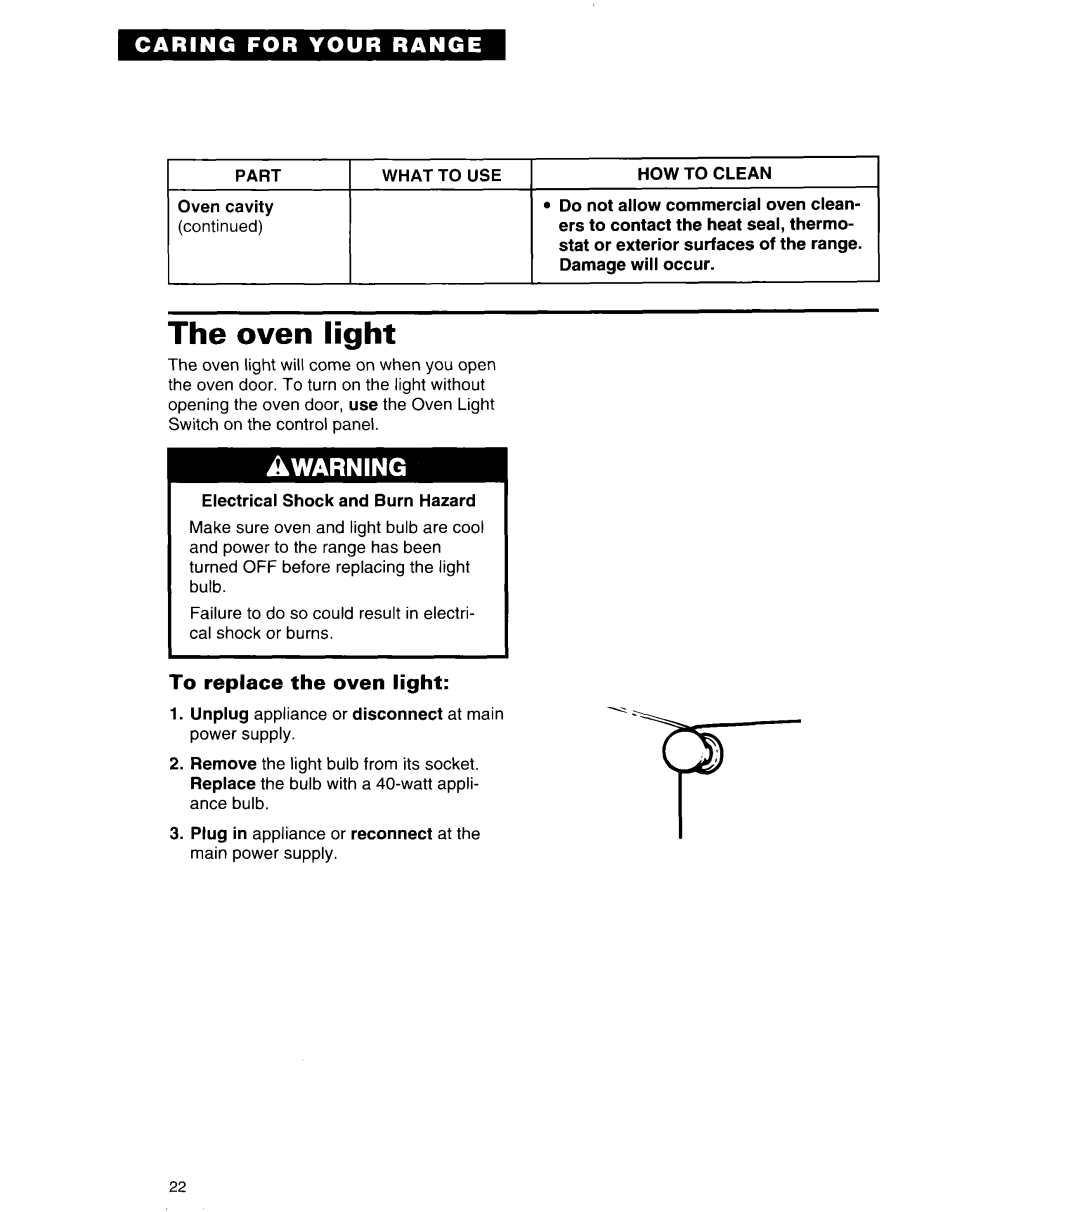 Roper FGP335Y important safety instructions The oven light, To replace the oven light 